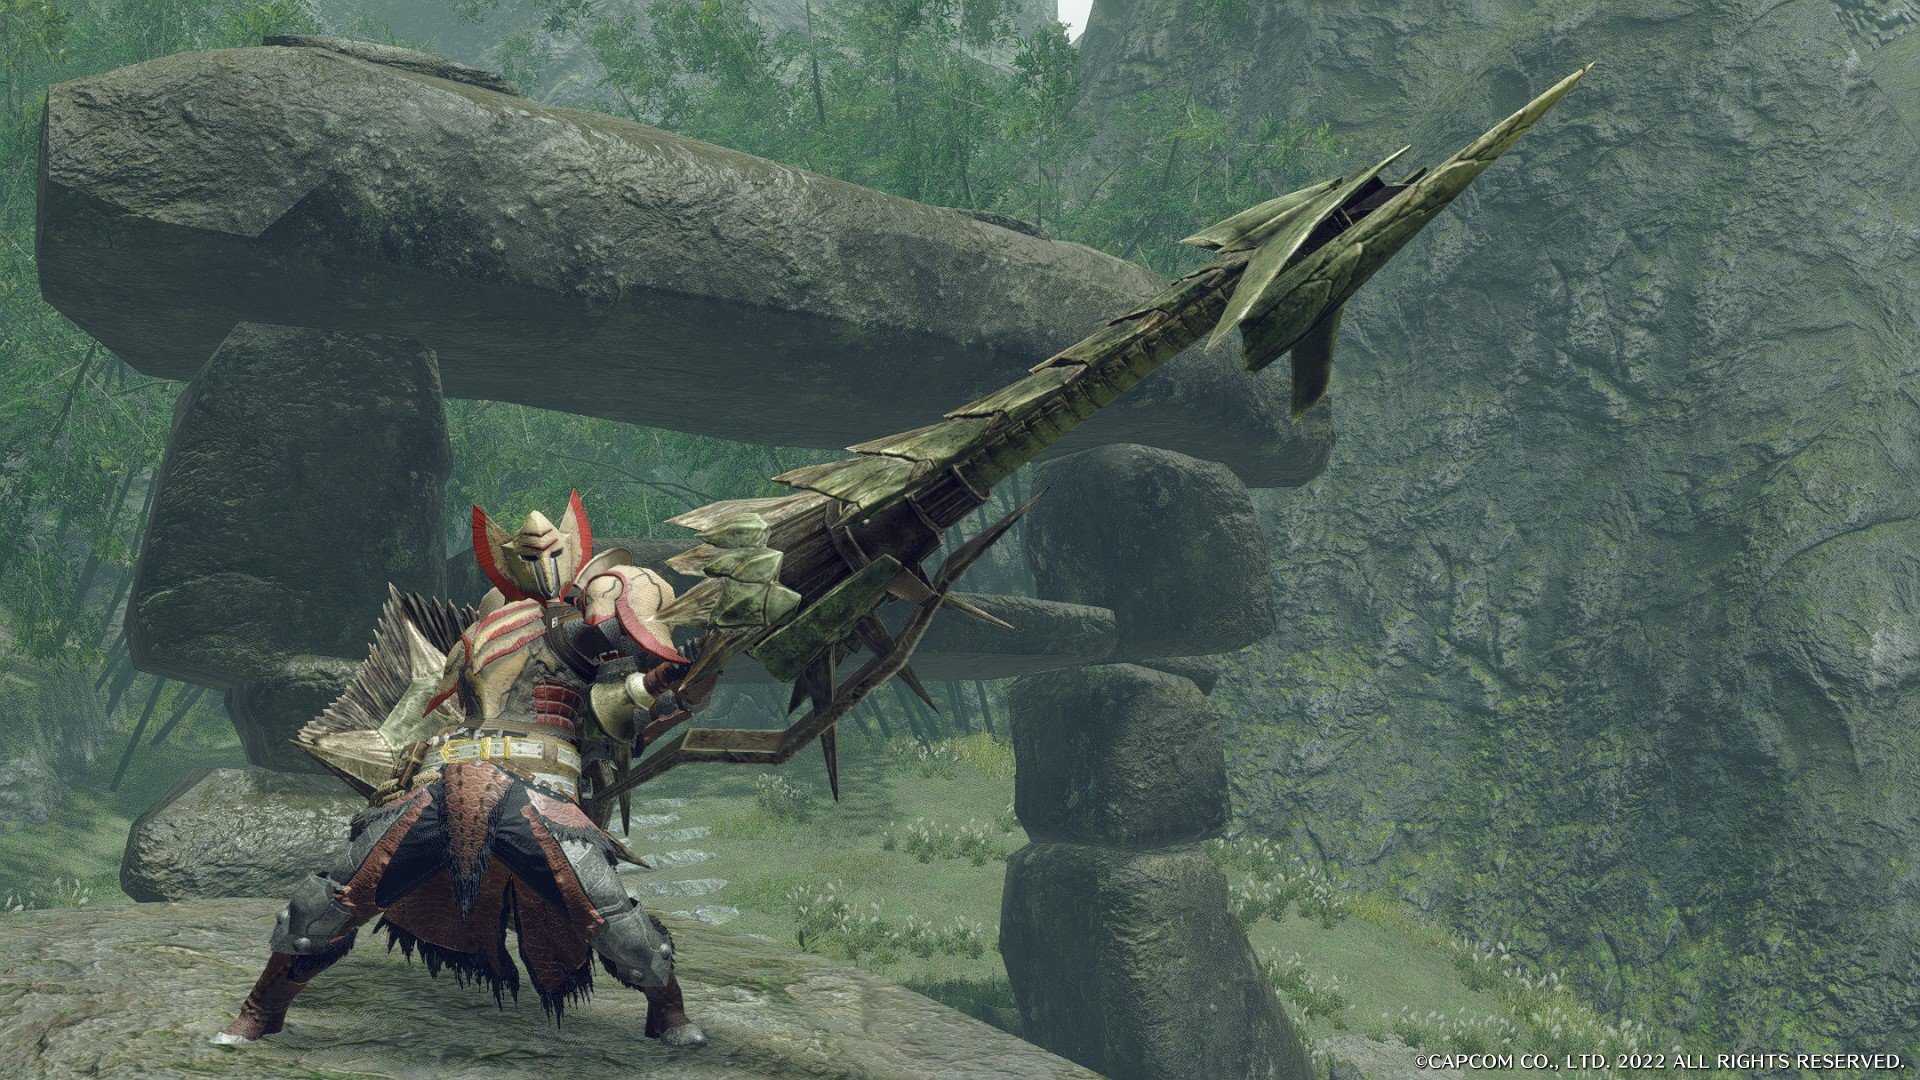 Monster Hunter Rise (PC) review: Slays the Switch original